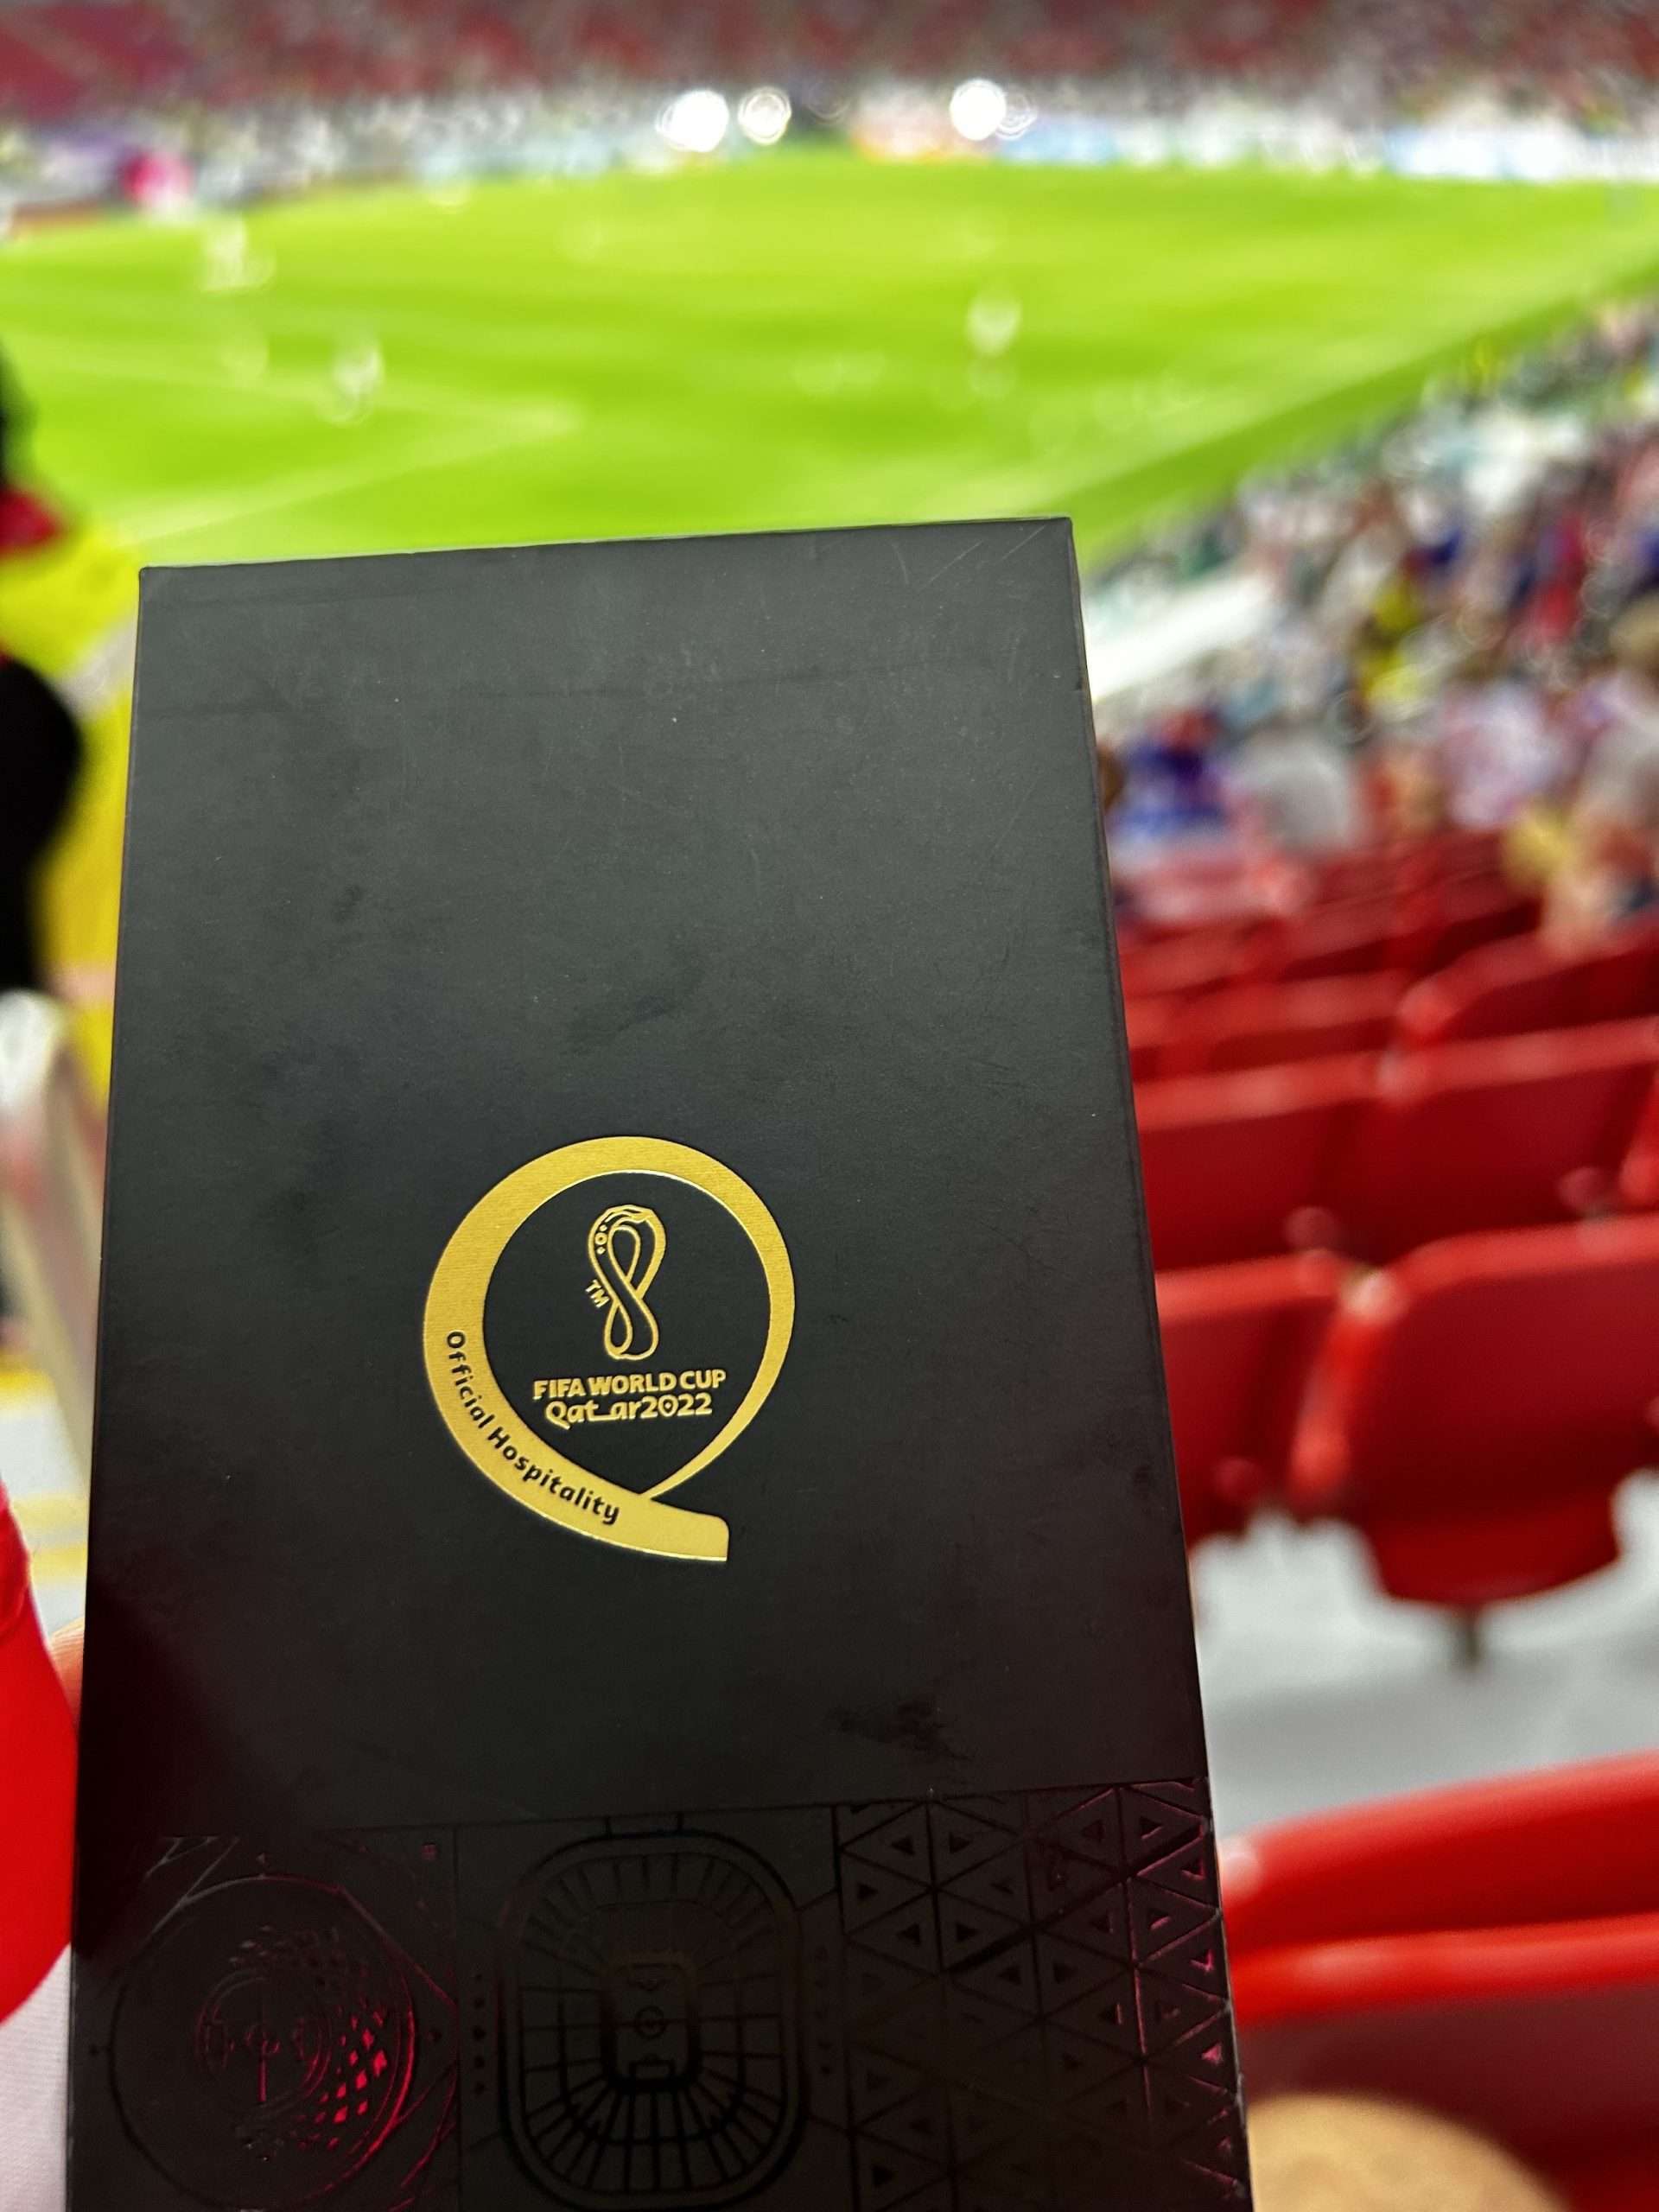 World Cup hospitality gift